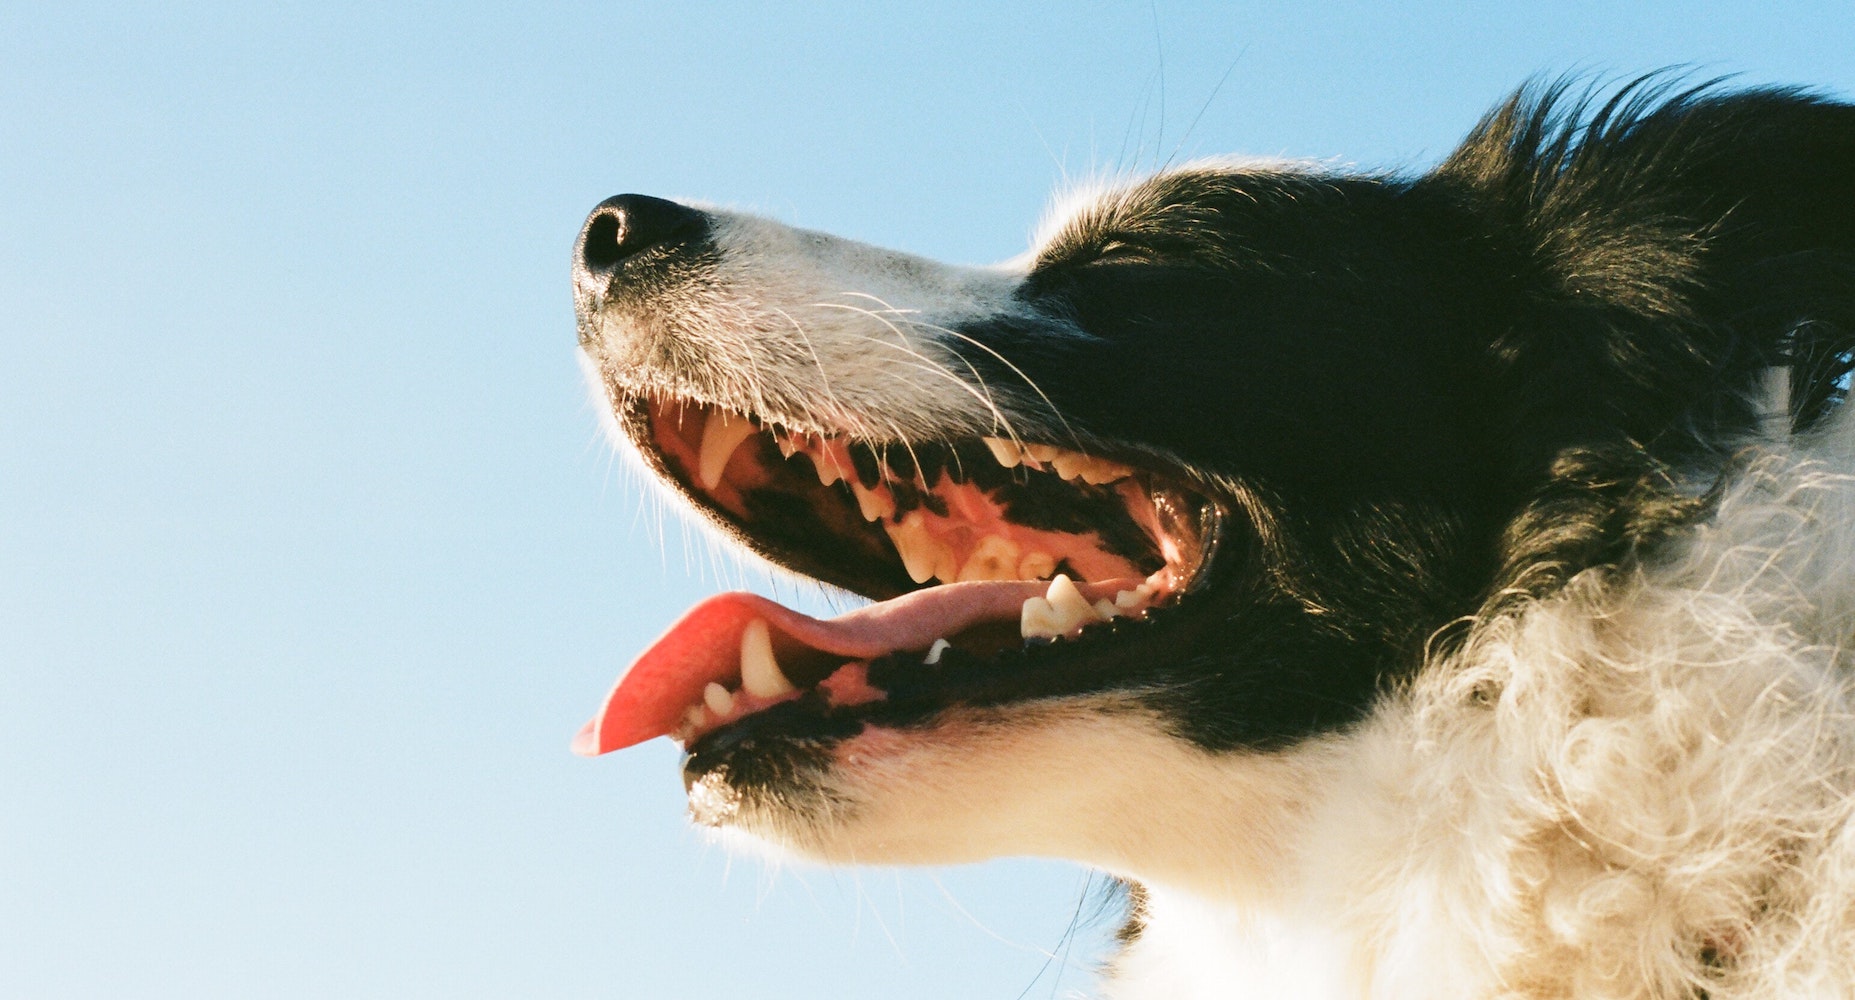 A dog smiling and showing off its teeth.